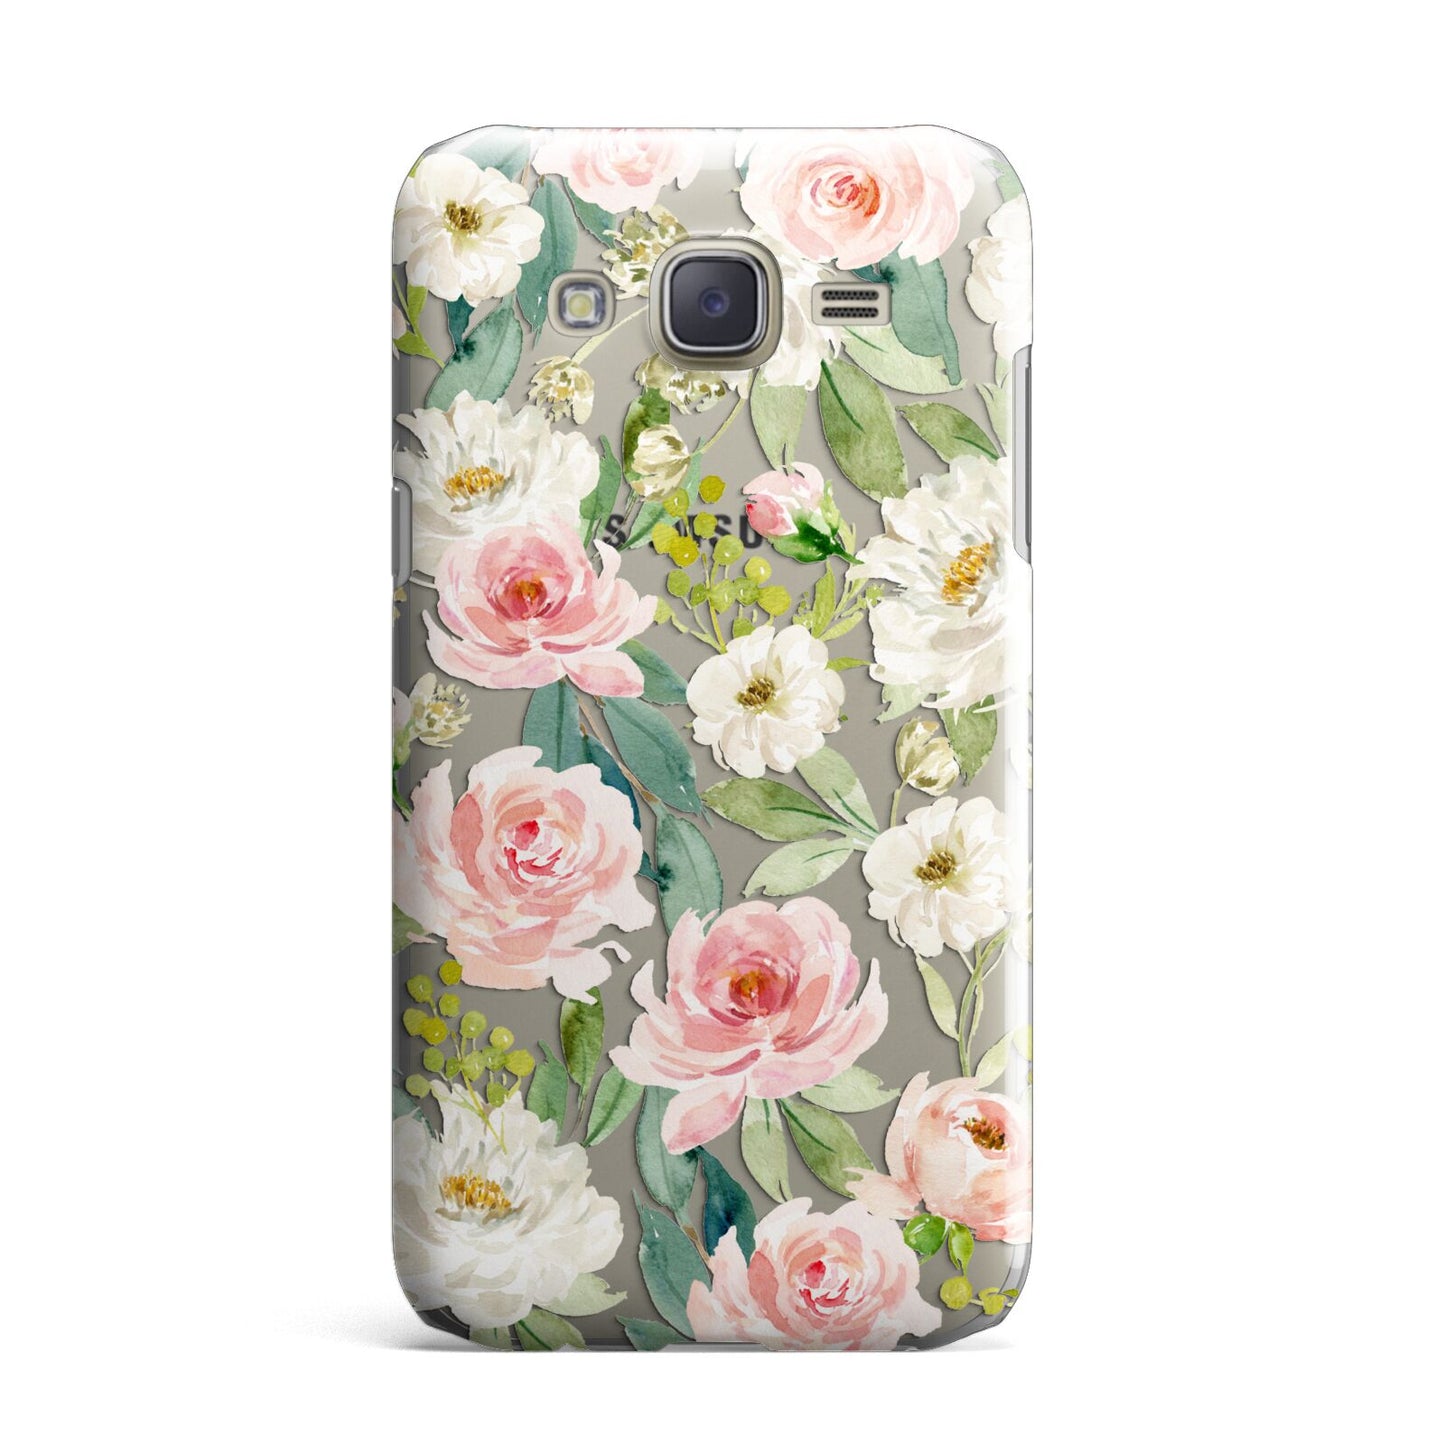 Watercolour Peonies Roses and Foliage Samsung Galaxy J7 Case